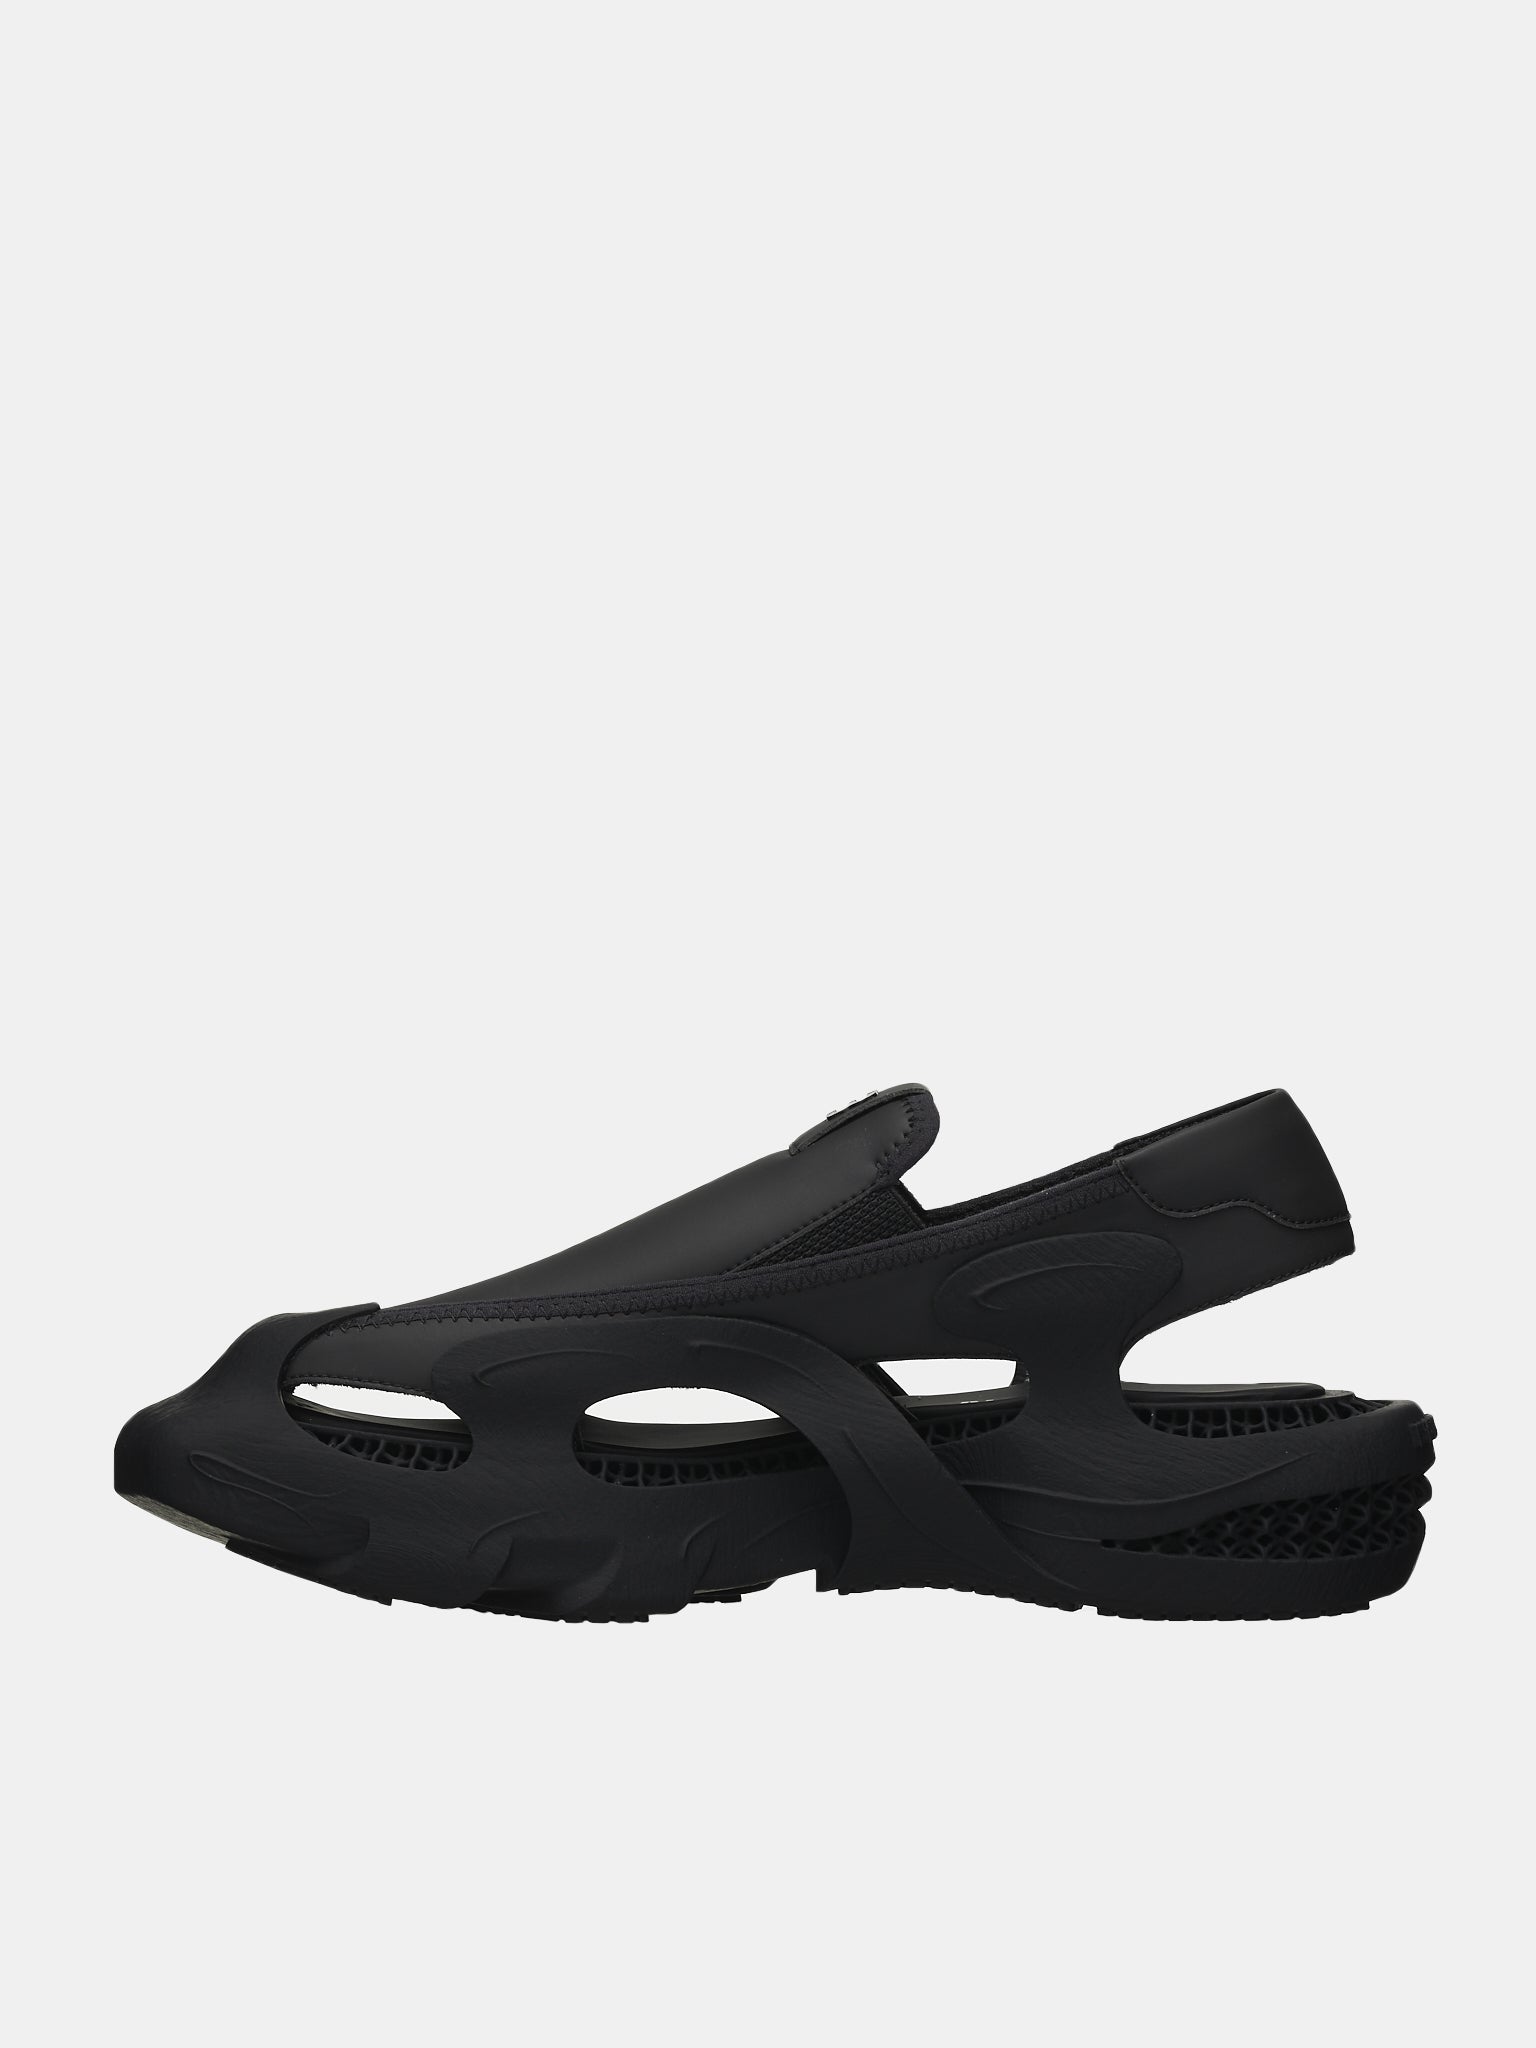 Clippers 3000 Sandals (N3-SS-3000-EUPHORIC-BLACK)